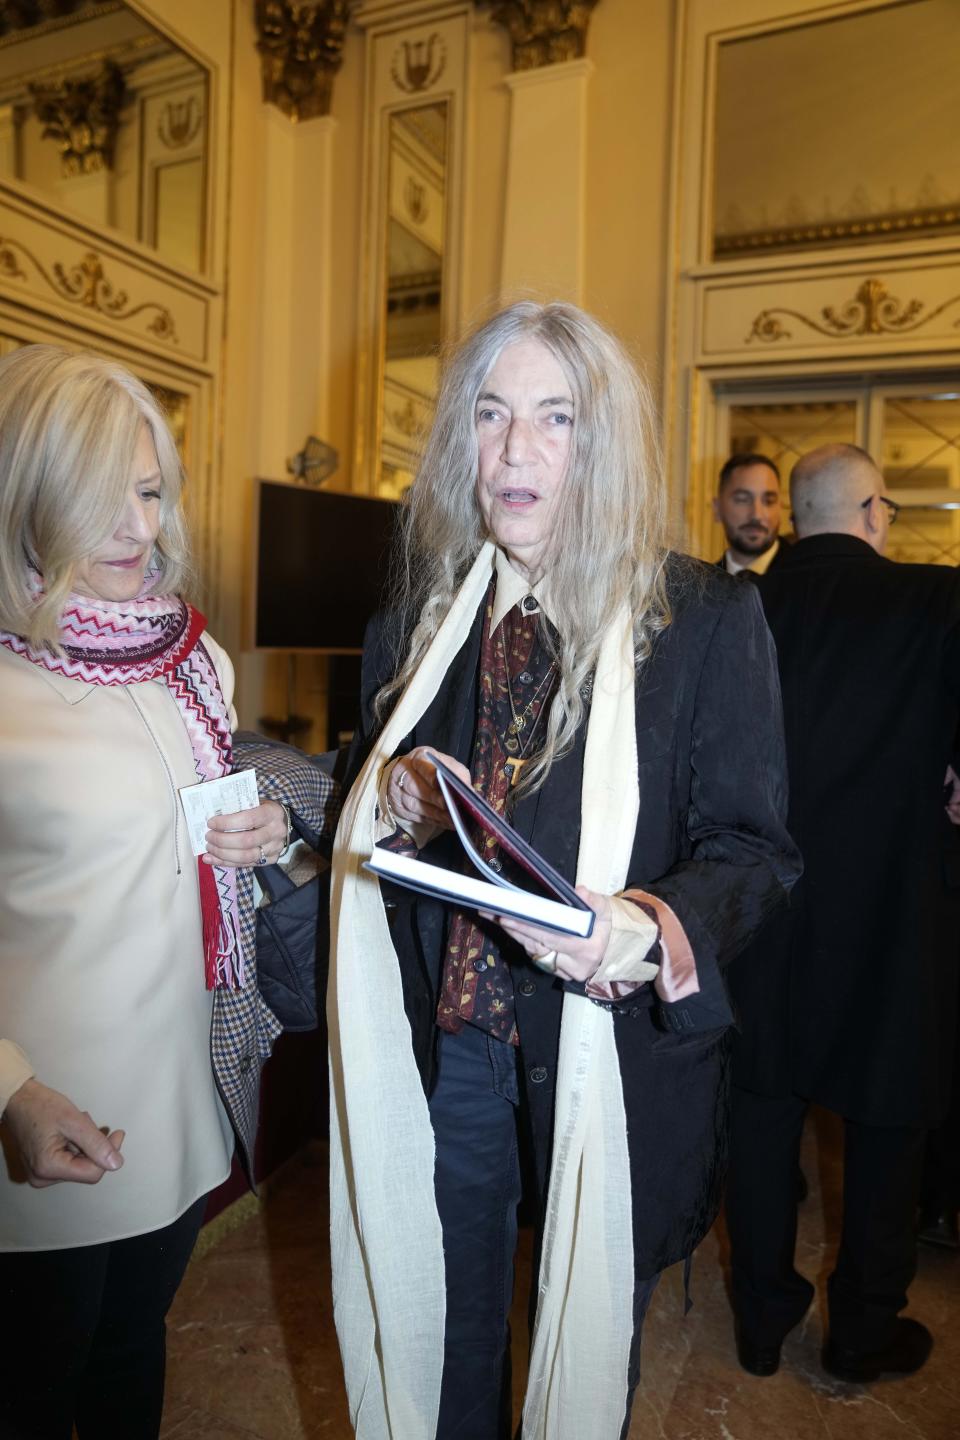 Patti Smith arrives to attend La Scala opera house's gala season opener, Giuseppe Verdi's opera 'Don Carlo' at the Milan La Scala theater, Italy, Thursday Dec. 7, 2023. The season-opener Thursday, held each year on the Milan feast day St. Ambrose, is considered one of the highlights of the European cultural calendar. (AP Photo/Luca Bruno)